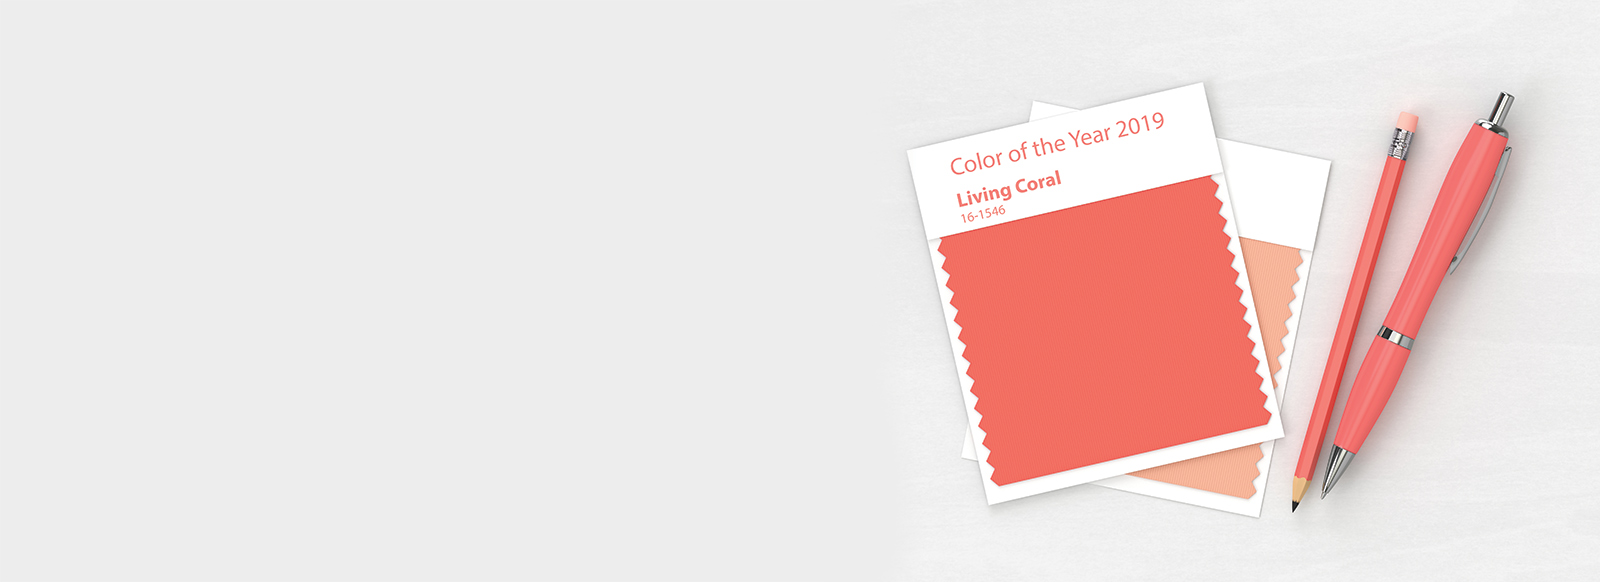 Coral paint swatch